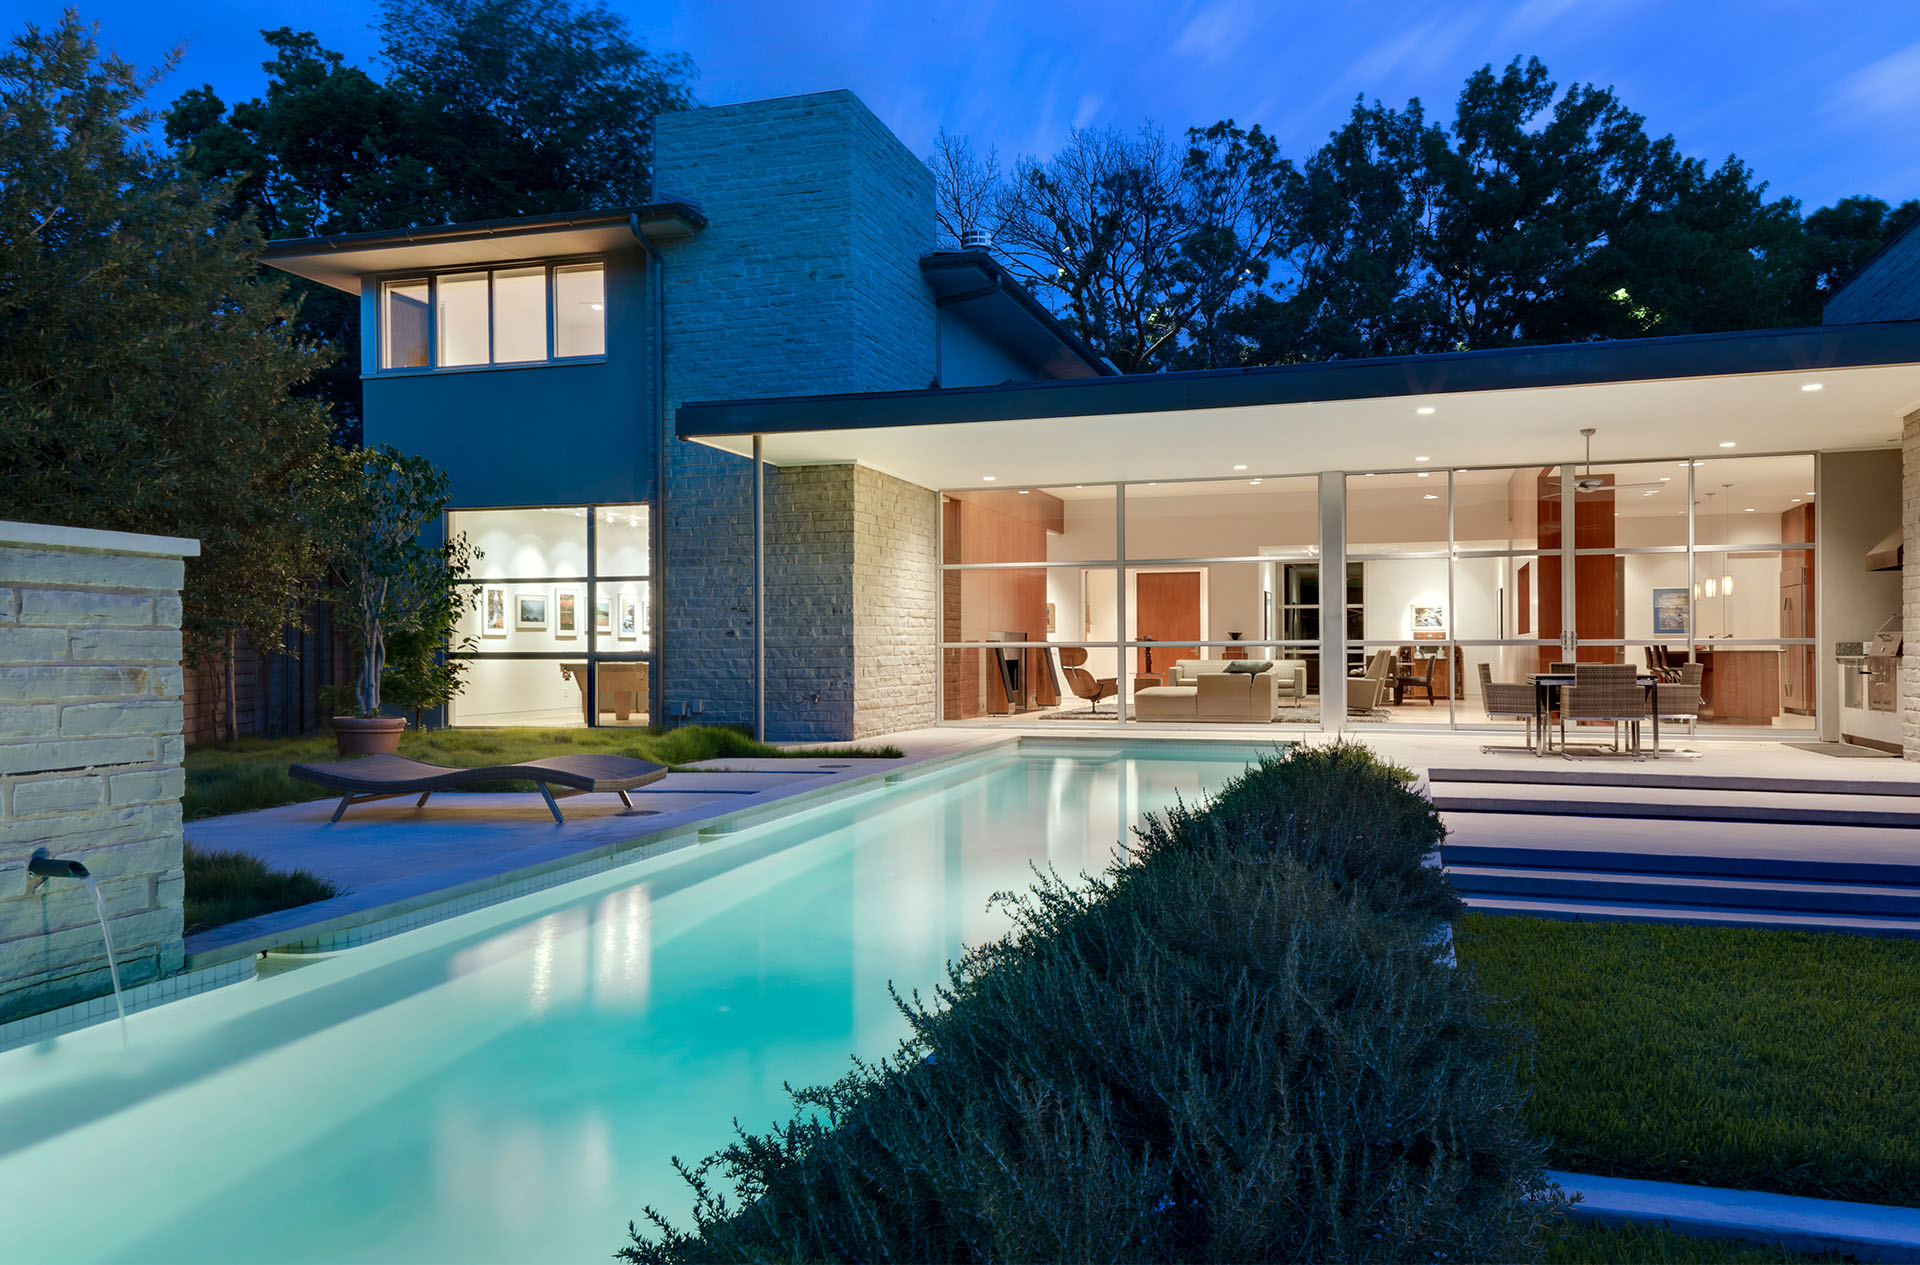 An AIA Home Tour comfortable modern contemporary designed by Bernbaum/Magadini Architects featuring a back yard with pool showing a wall of windows looking into a living room.